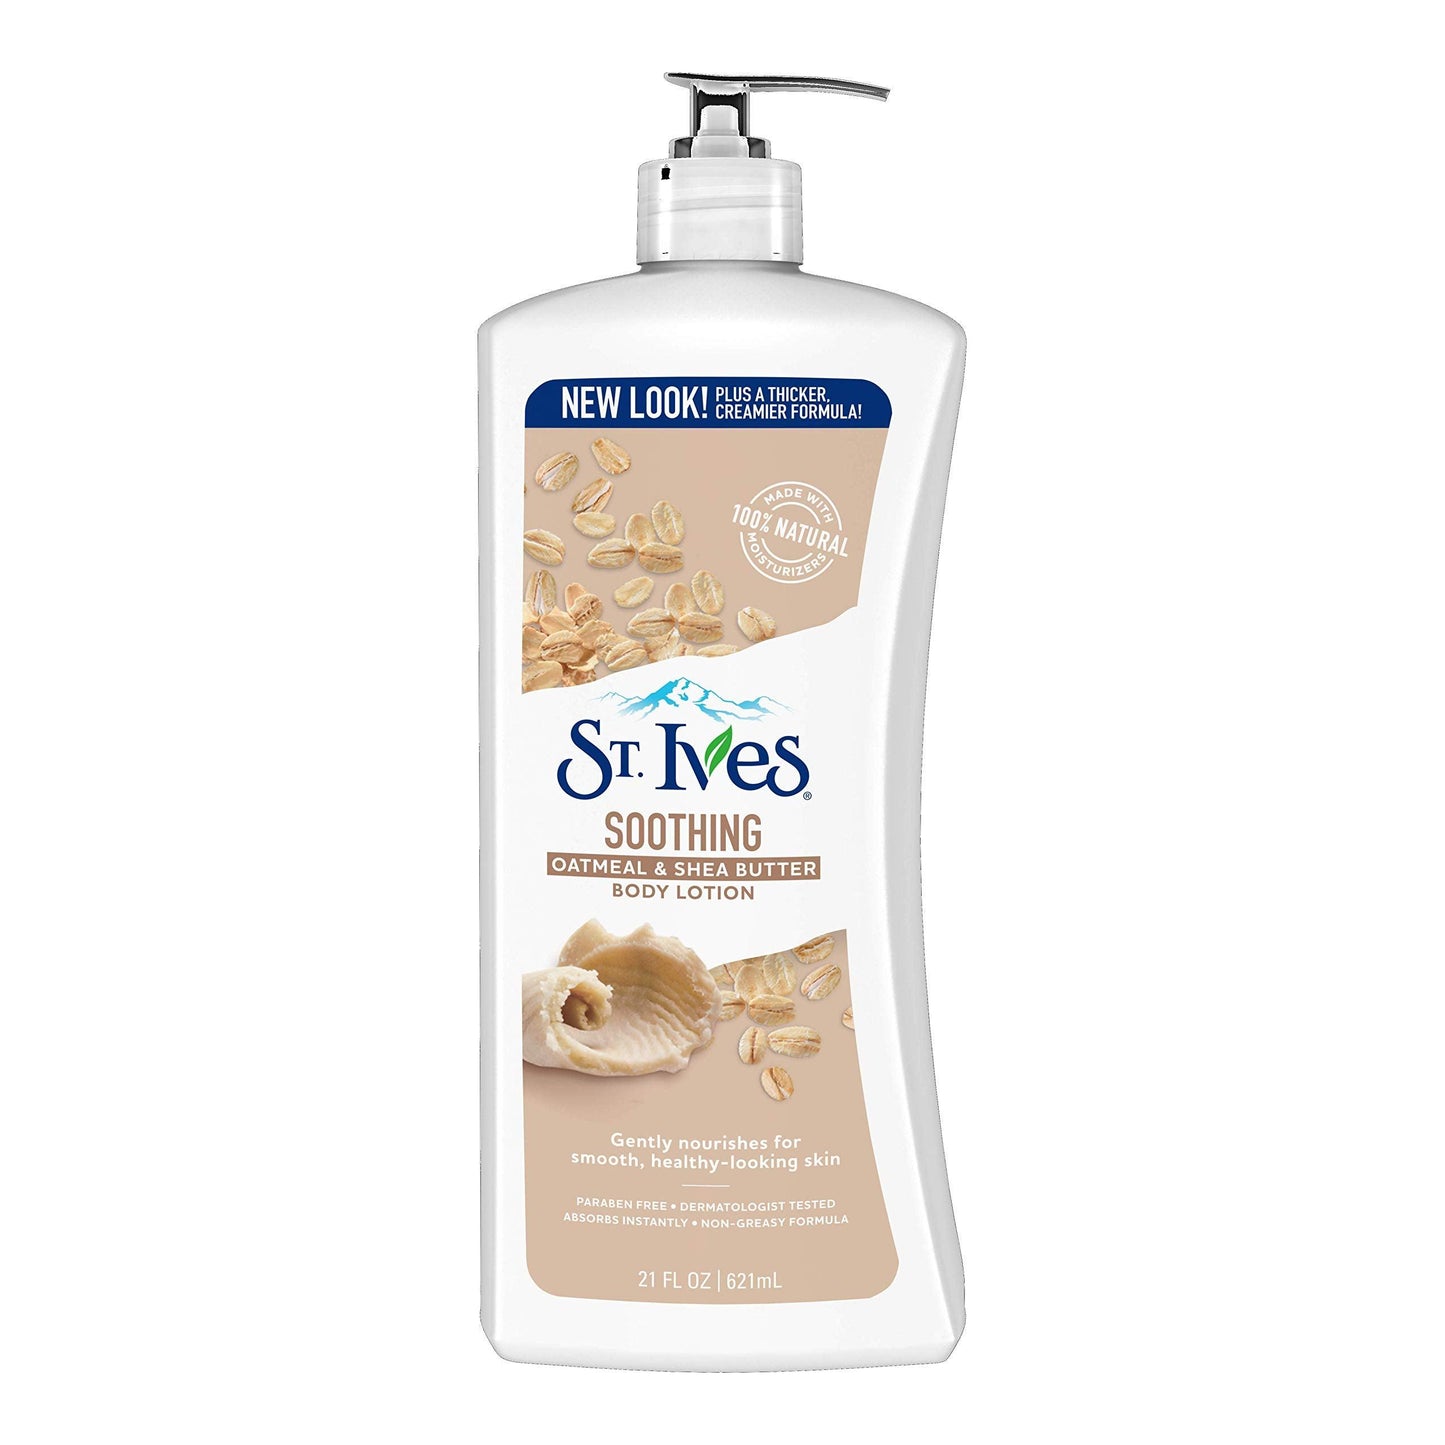 ST.IVES SOOTHING OATMEAL & SHEA BUTTER BODY LOTION 621 ML - Beauty Bounty